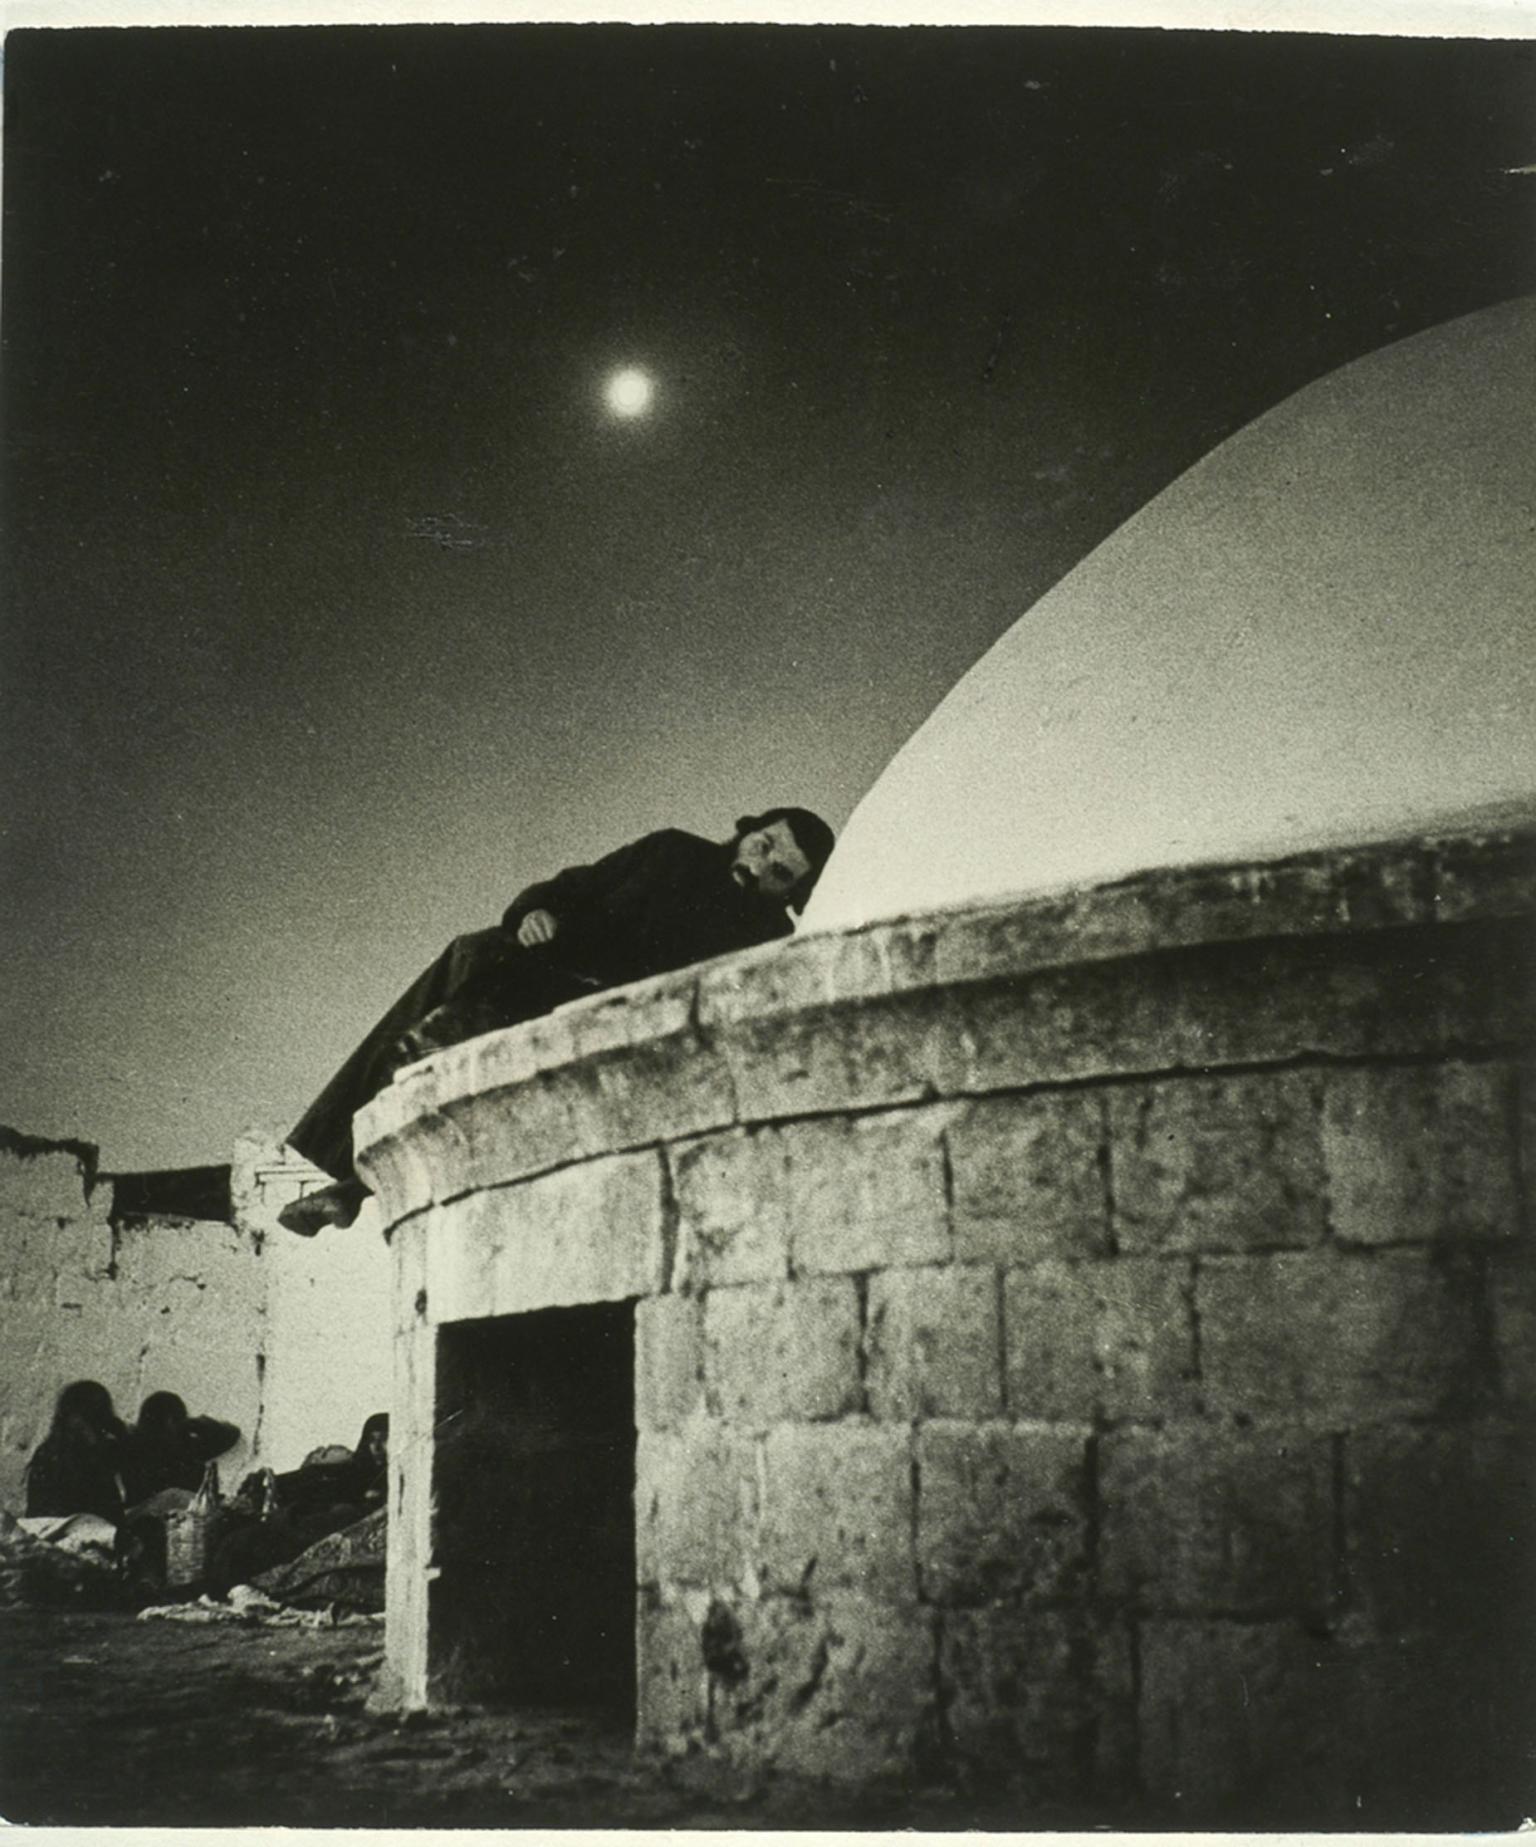 Photograph of man lying on domed roof of stone building.